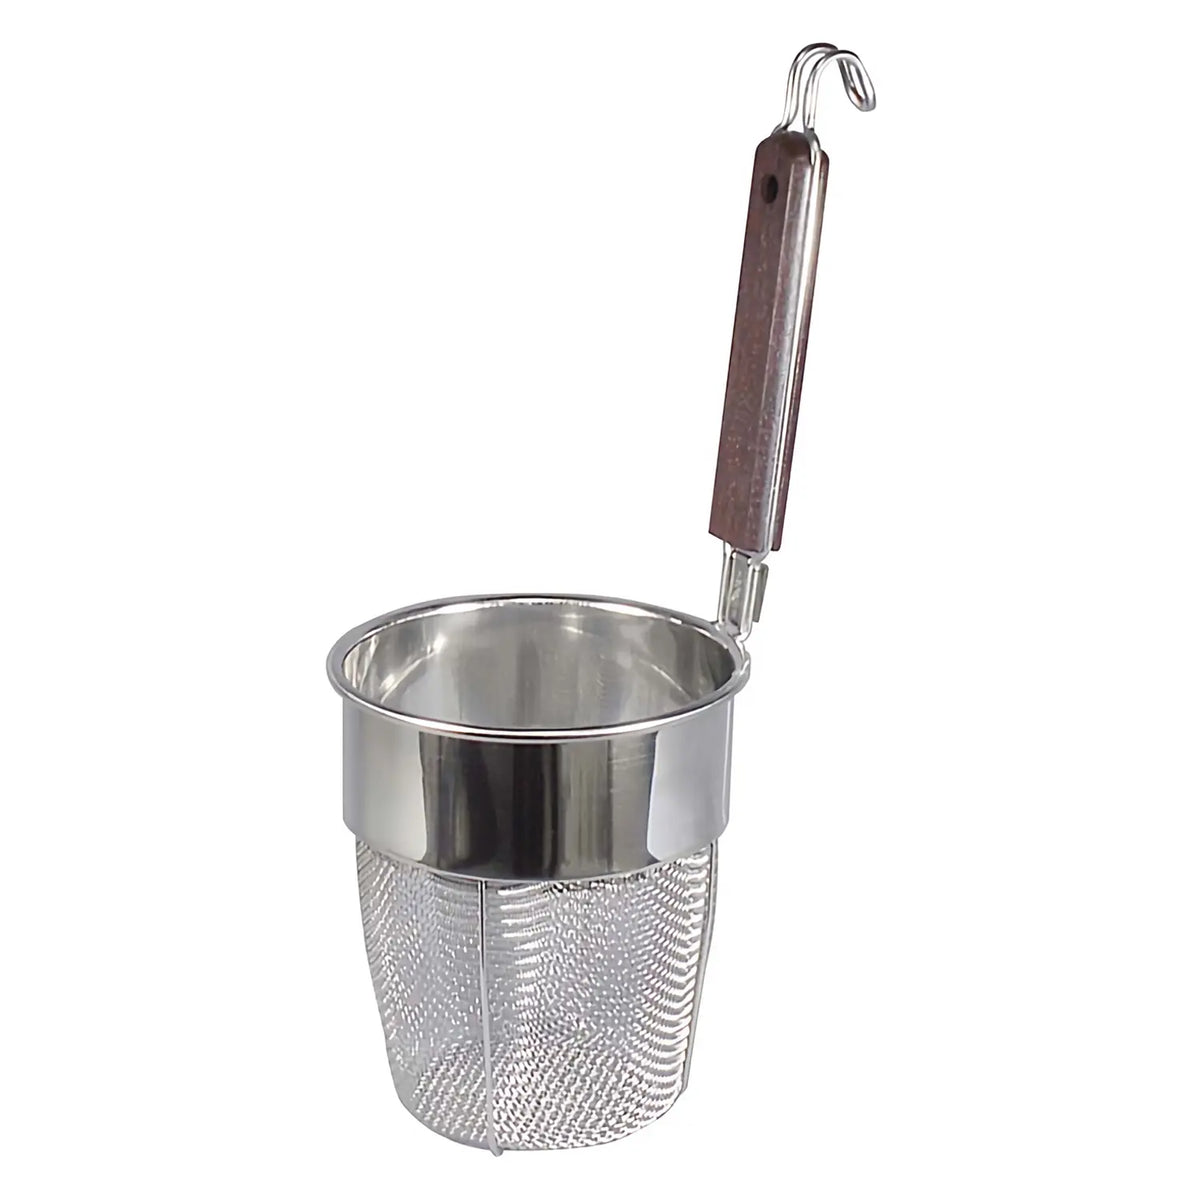 Fujiboshi Stainless Steel Deep Udon Noodle Strainer Flat Base with Wooden Handle